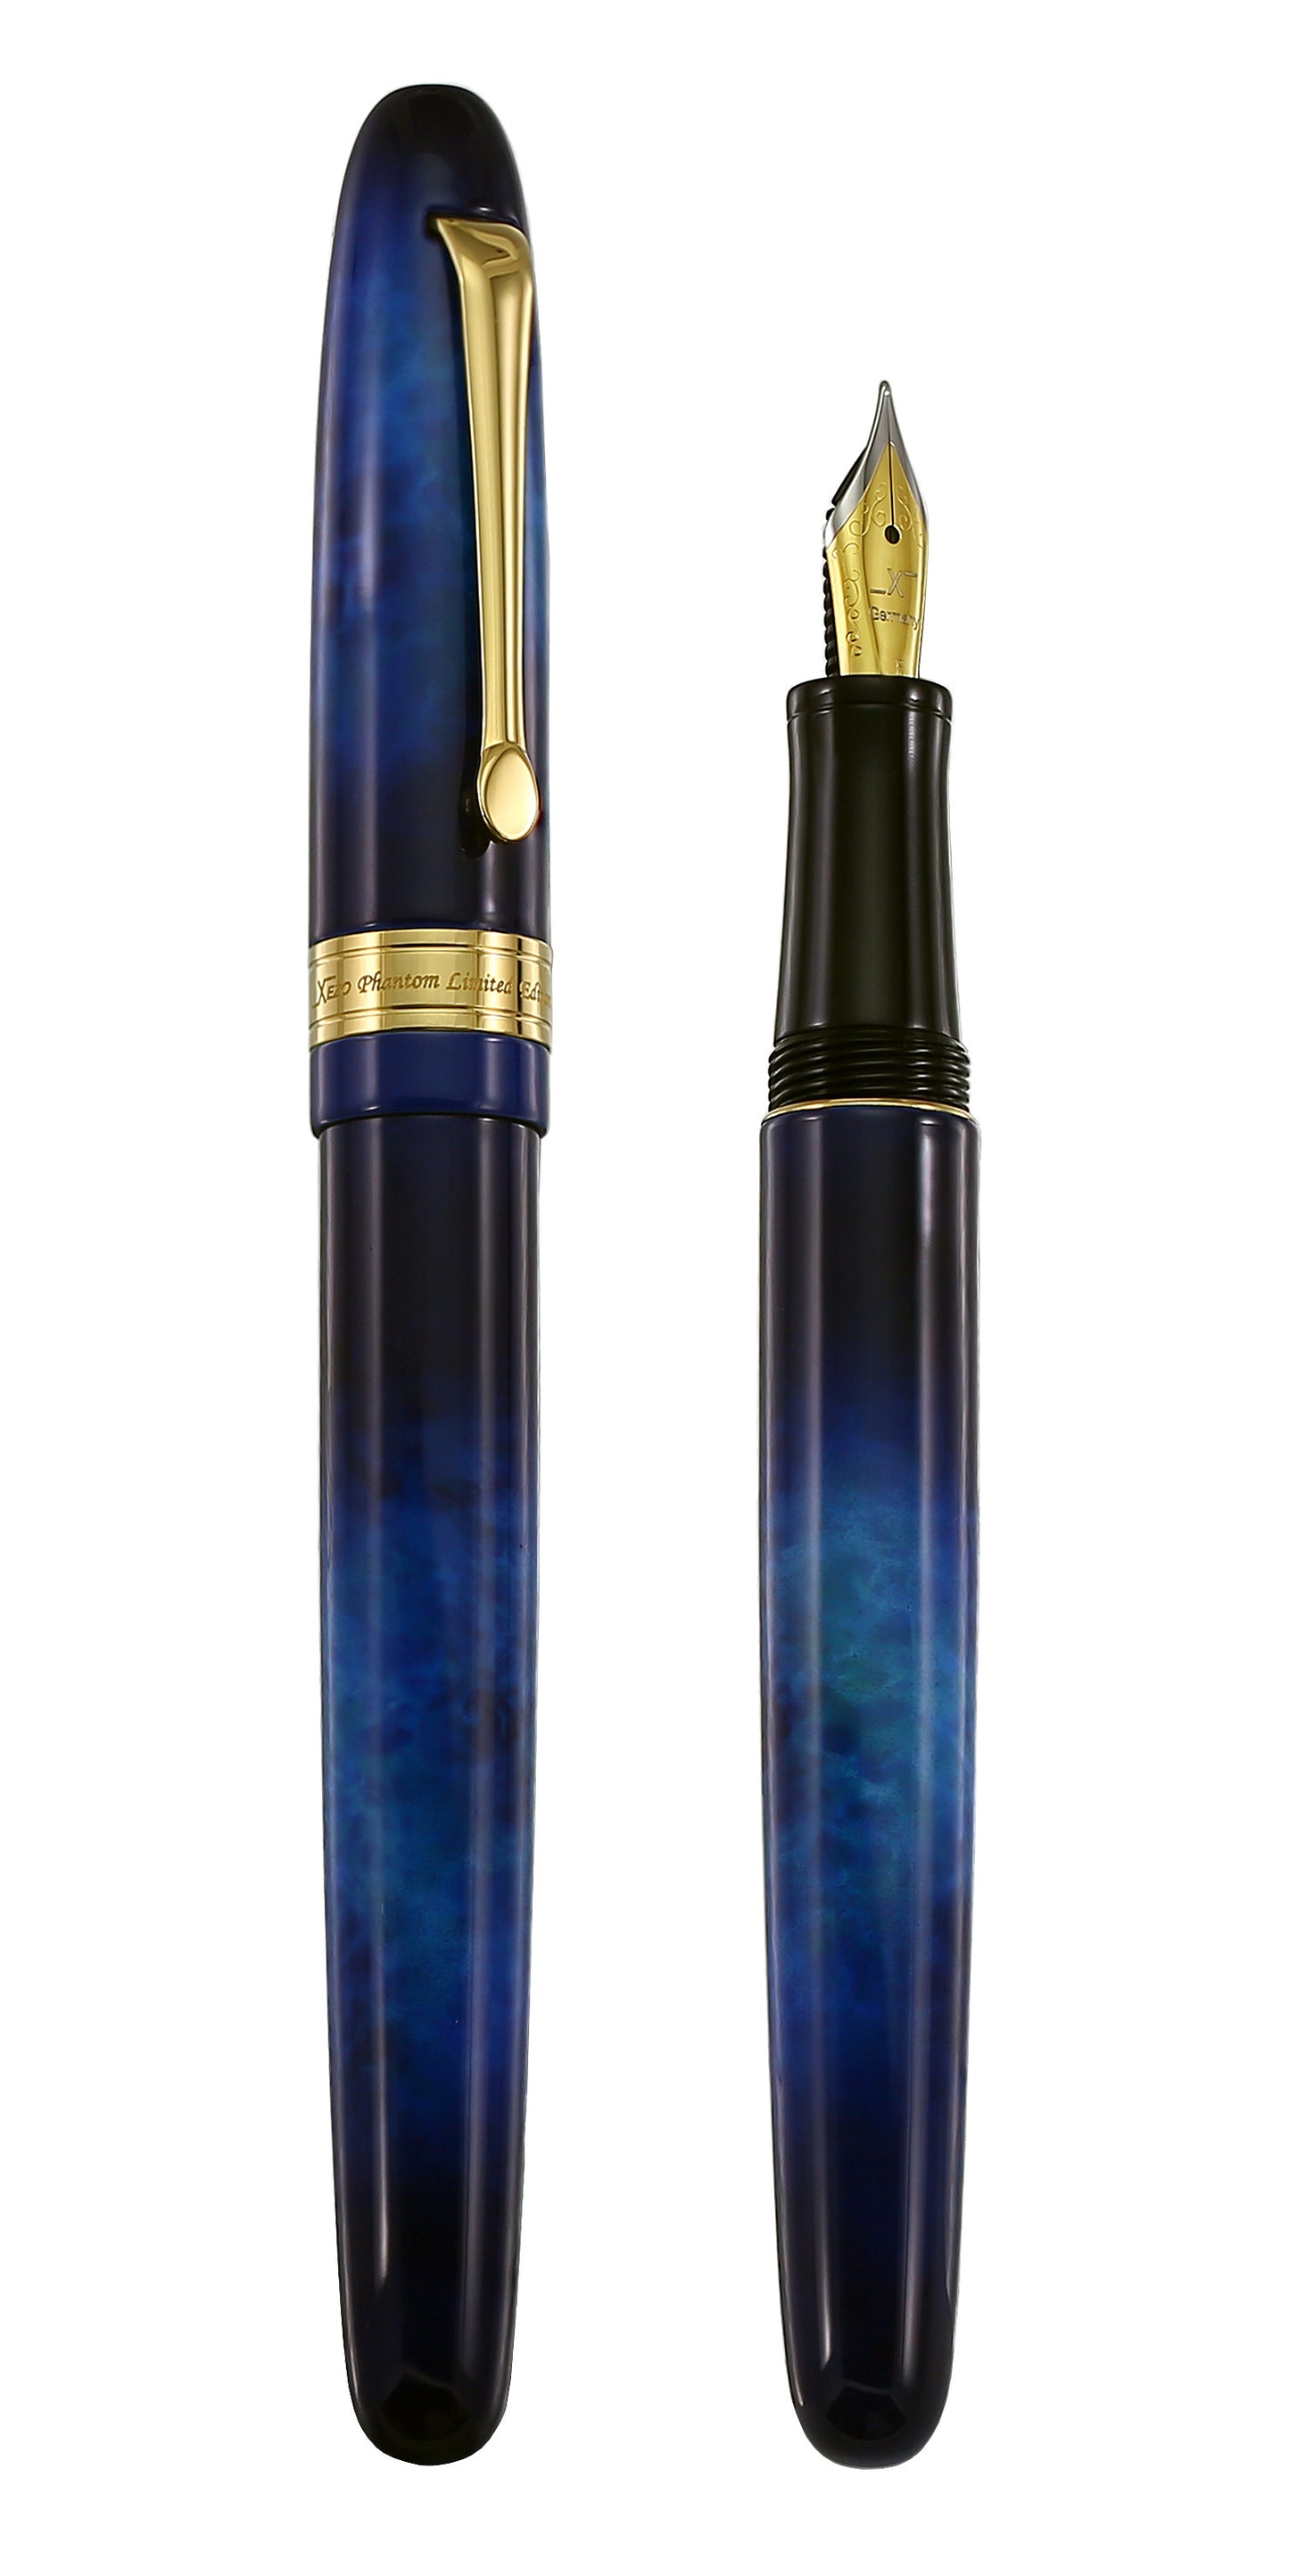 Xezo – Comparison between 3/4 view of the capped and uncapped Phantom Stardust FM fountain pen